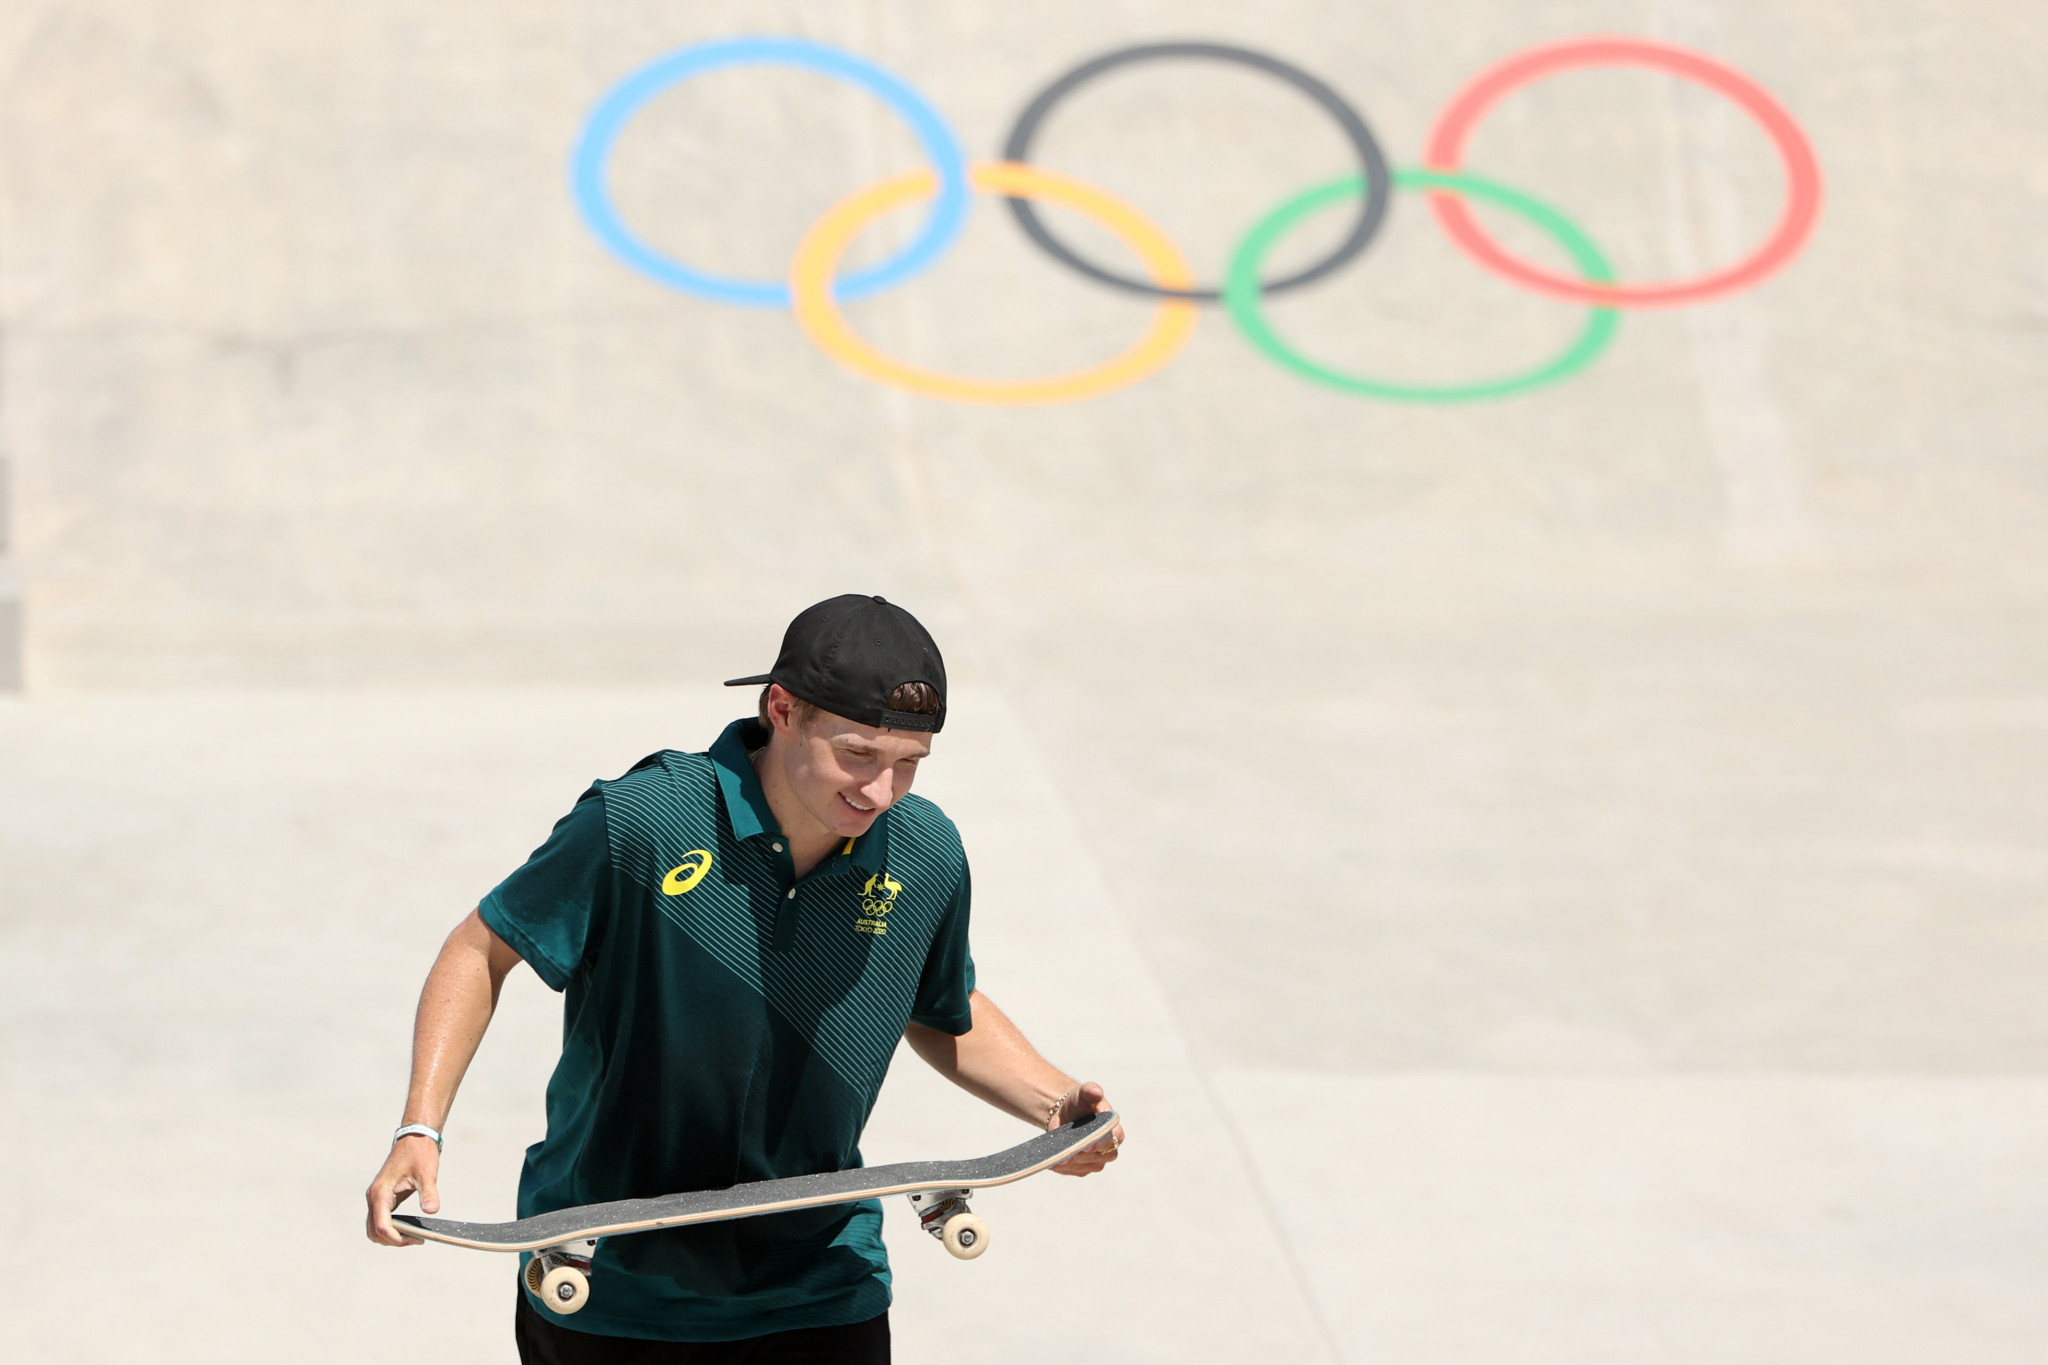 Shane O'Neill says Paris 2024 could be his last skateboarding competition ©Getty Images